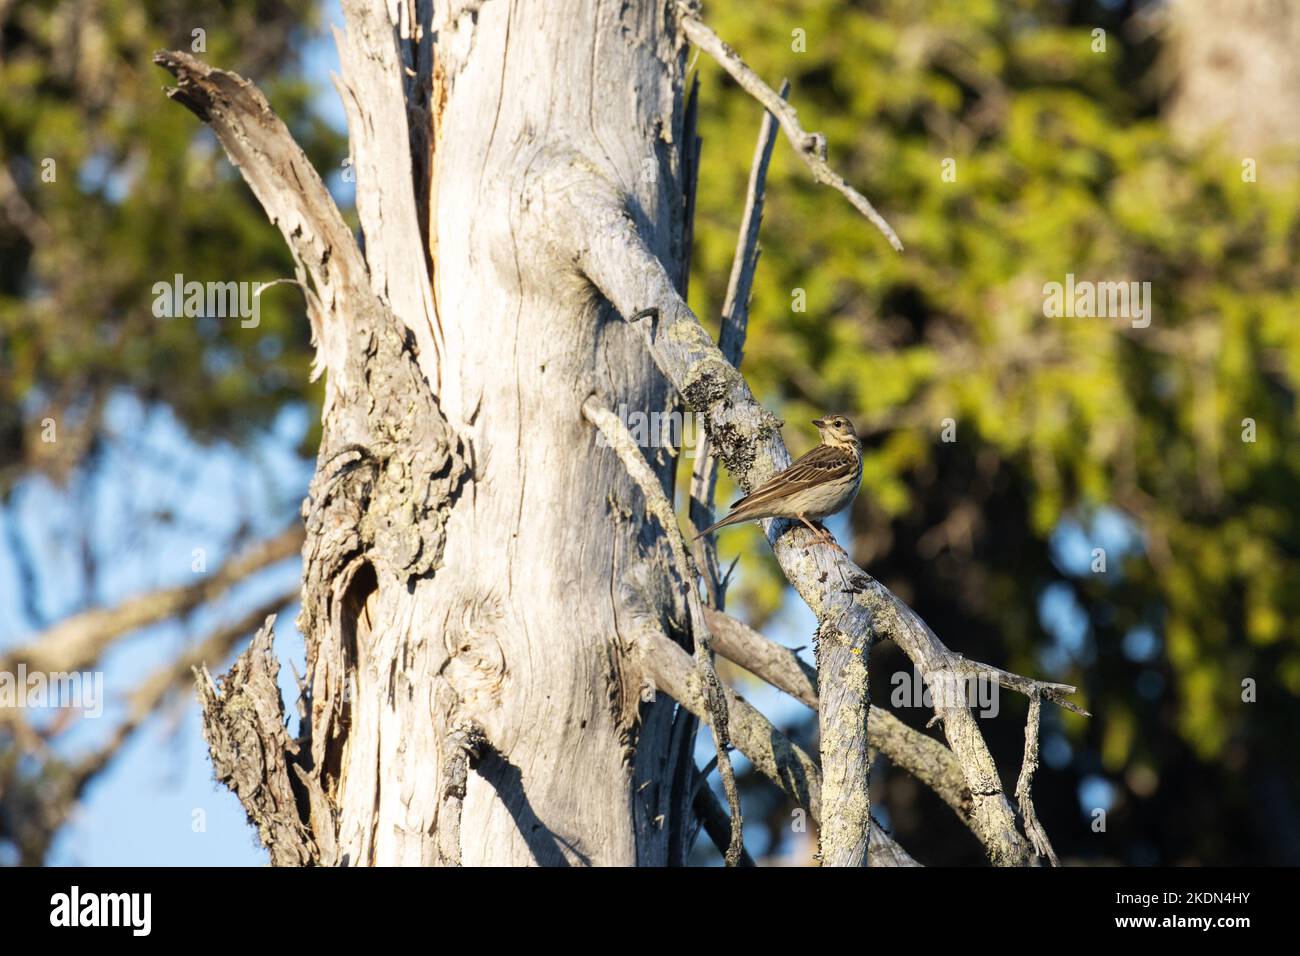 Wood pipit, Anthus trivialis perched on a large and old dead Spruce tree in summery Oulanka National Park, Northern Finland Stock Photo